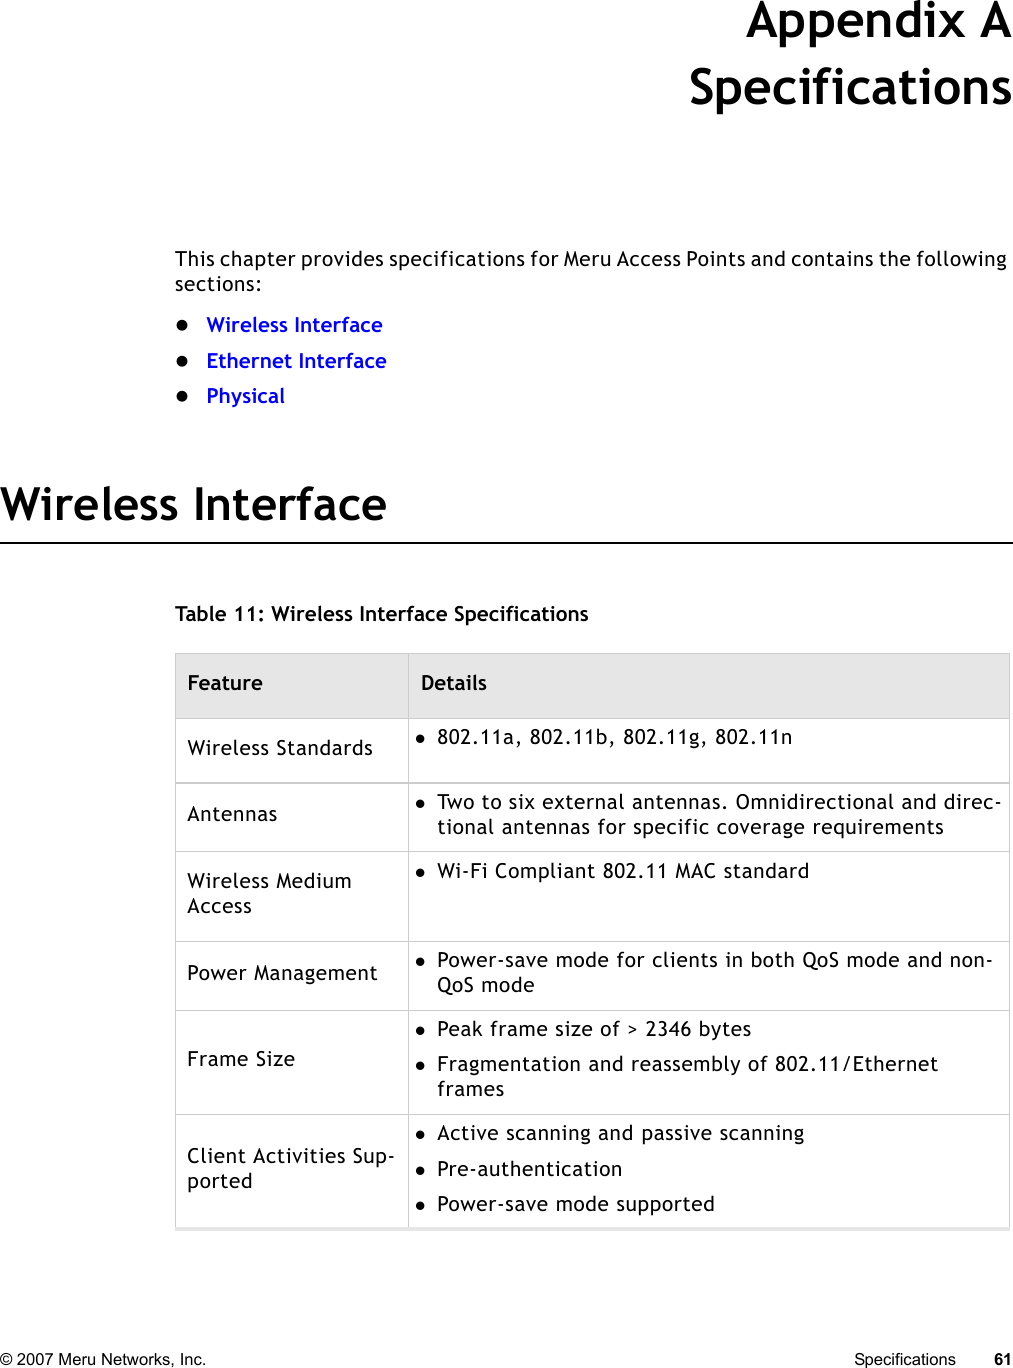 © 2007 Meru Networks, Inc. Specifications 61 Appendix ASpecificationsThis chapter provides specifications for Meru Access Points and contains the following sections:zWireless InterfacezEthernet InterfacezPhysicalWireless InterfaceTable 11: Wireless Interface SpecificationsFeature DetailsWireless Standards z802.11a, 802.11b, 802.11g, 802.11nAntennas zTwo to six external antennas. Omnidirectional and direc-tional antennas for specific coverage requirementsWireless Medium AccesszWi-Fi Compliant 802.11 MAC standardPower Management zPower-save mode for clients in both QoS mode and non-QoS modeFrame SizezPeak frame size of &gt; 2346 byteszFragmentation and reassembly of 802.11/Ethernet framesClient Activities Sup-portedzActive scanning and passive scanningzPre-authenticationzPower-save mode supported